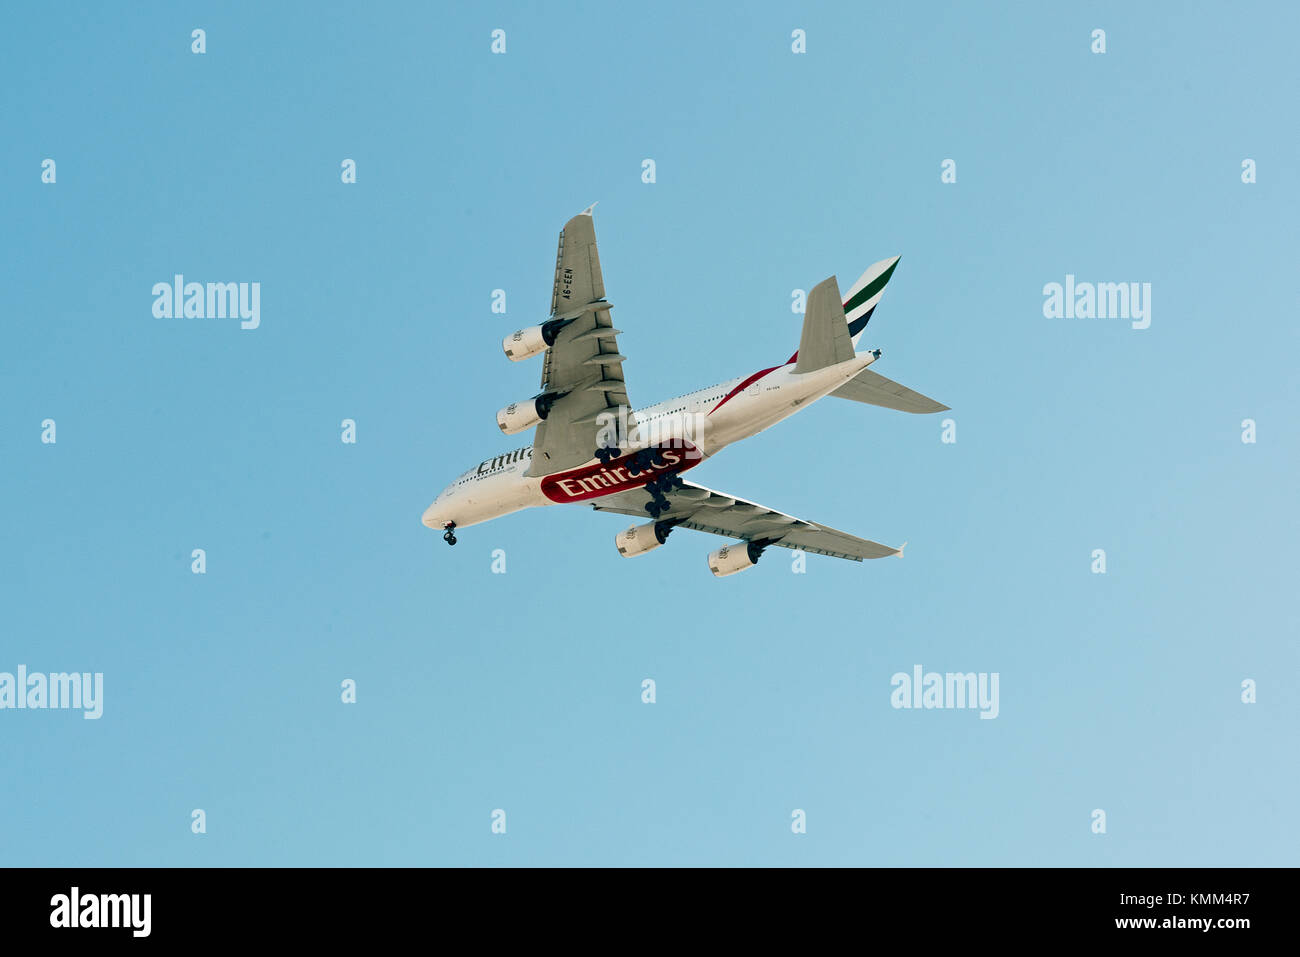 Emirates Airbus A380 on glide path to landing at Jeddah International airport. Quick photo taken from street level in district under flight-path. Stock Photo